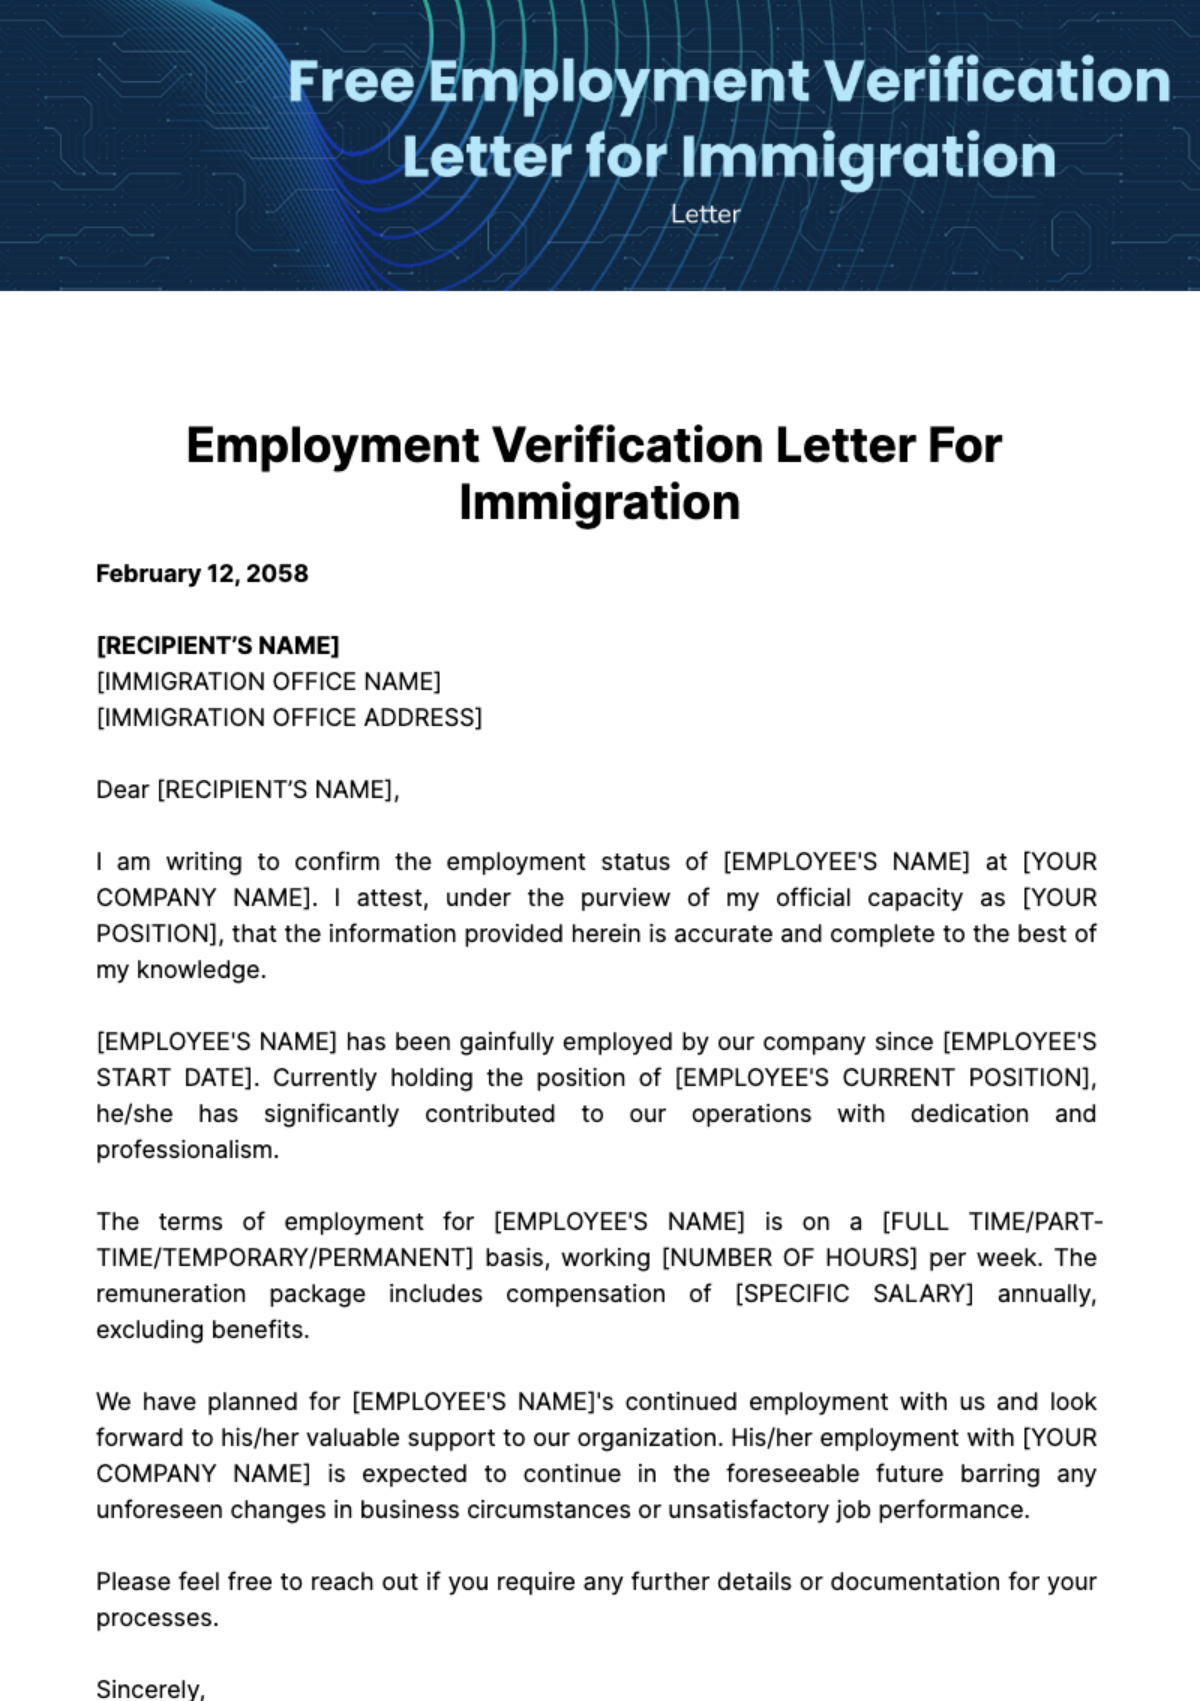 Free Employment Verification Letter for Immigration Template